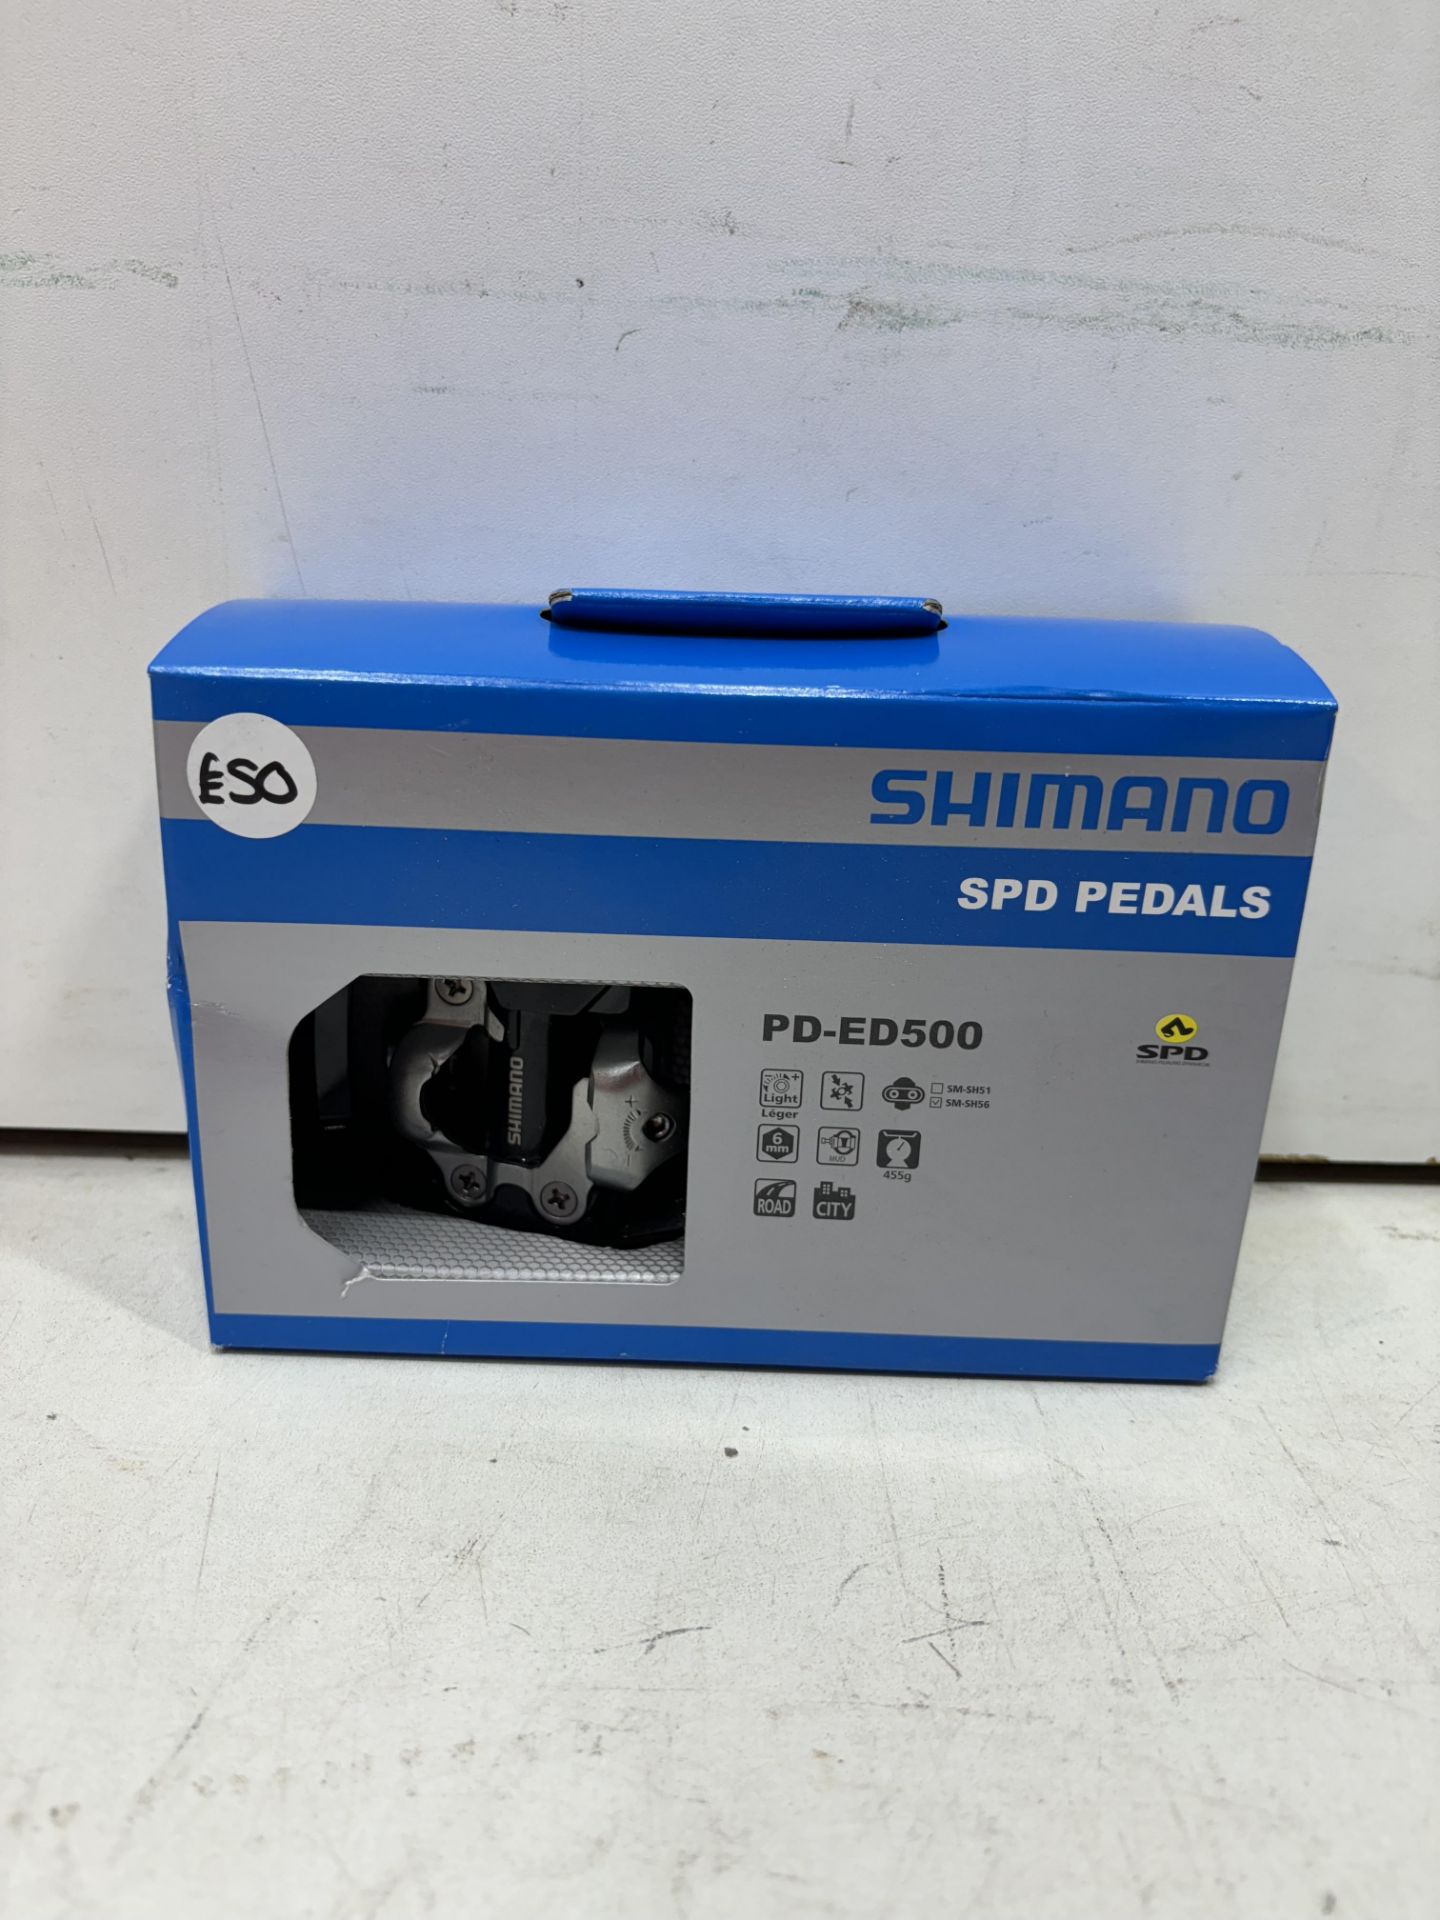 SHIMANO PD-ED500 Spd Road Pedals - Image 3 of 6